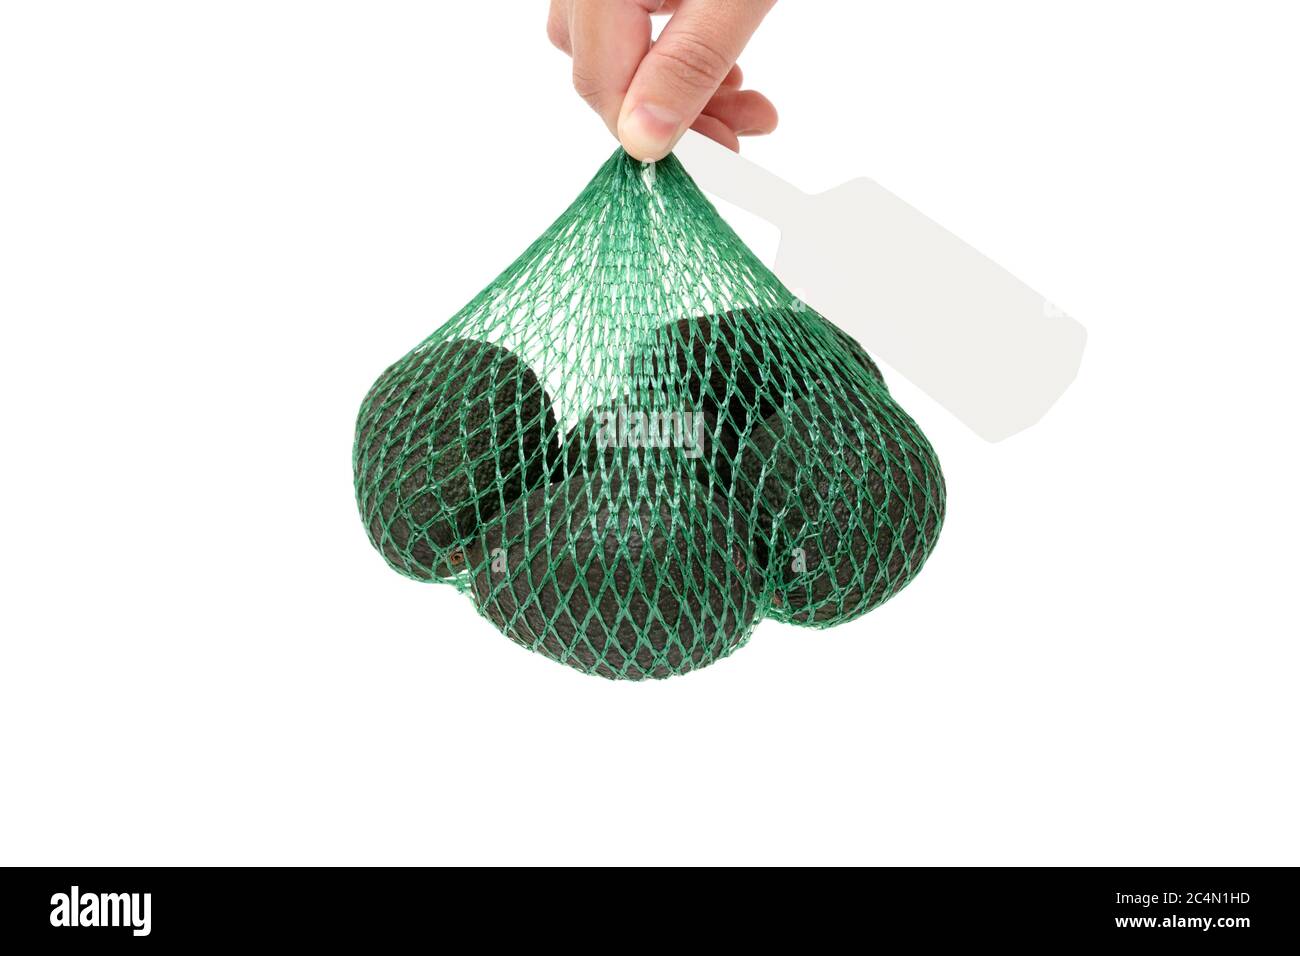 Female hand holding a fresh organic hass avocados in a green mesh bag with a grey tag isolated on white. Healthy food concept. Stock Photo